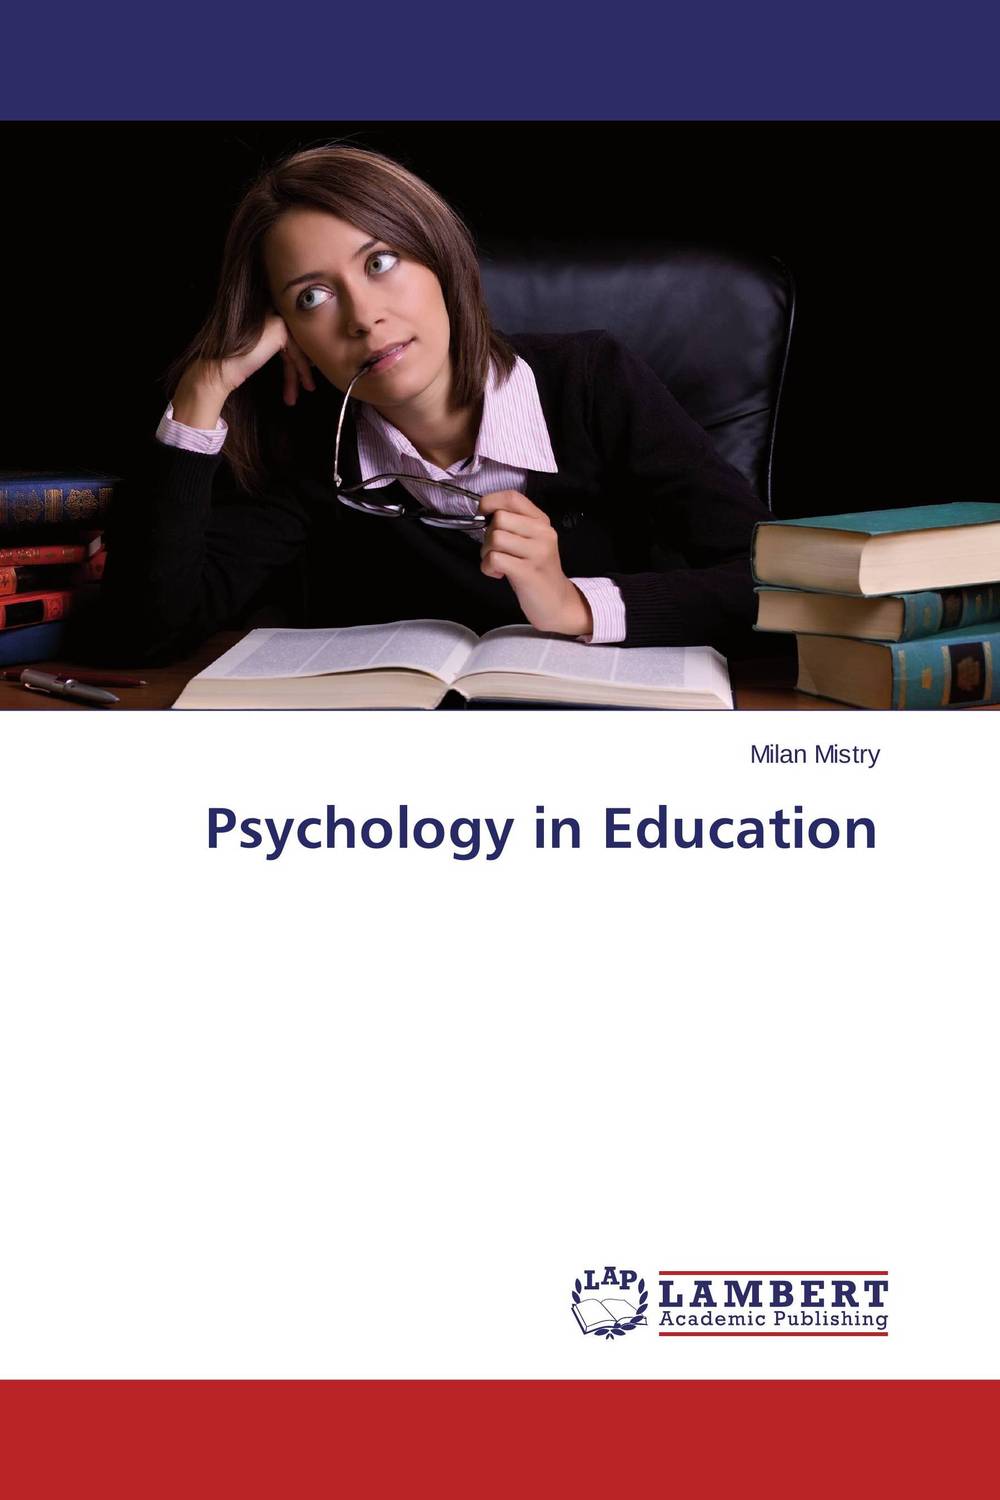 Psychology in Education